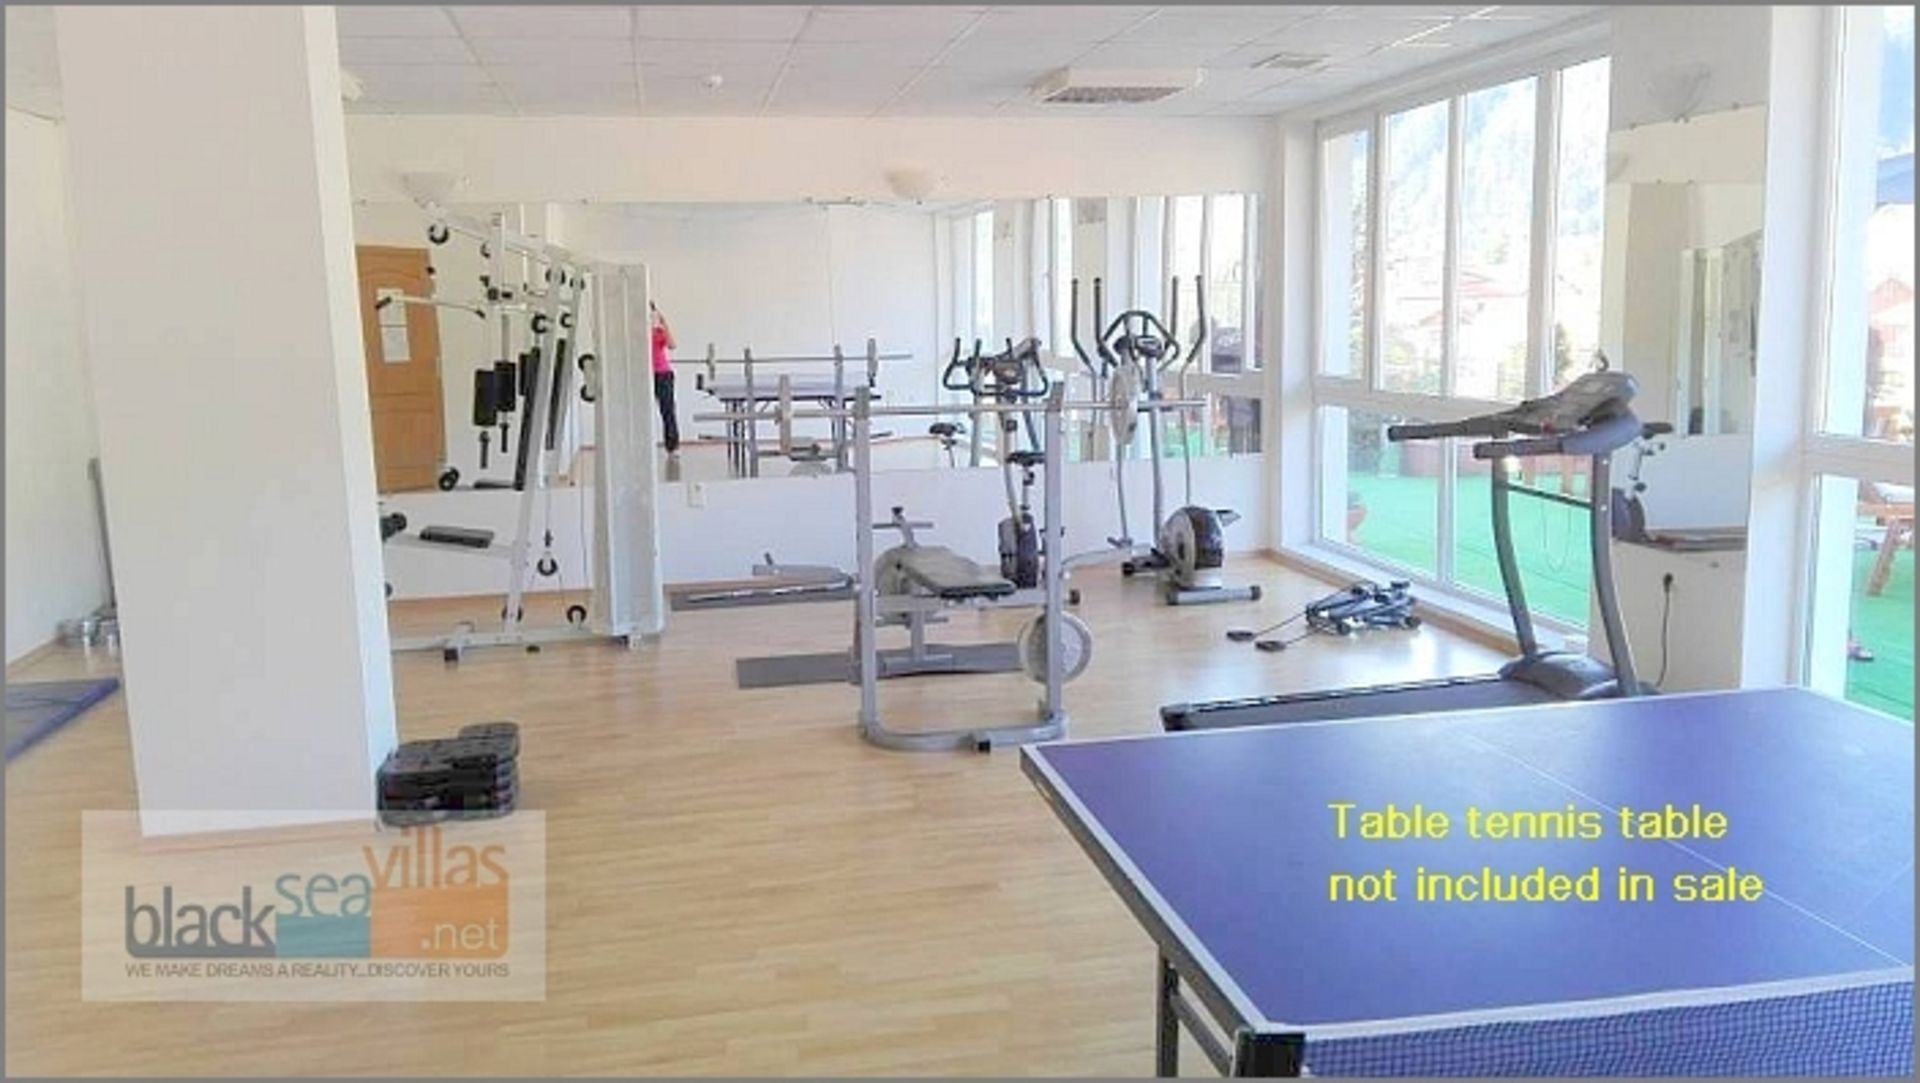 Large leisure centre in beautiful mountain resort. For sale at very low price. Great lifestyle and b - Image 8 of 45